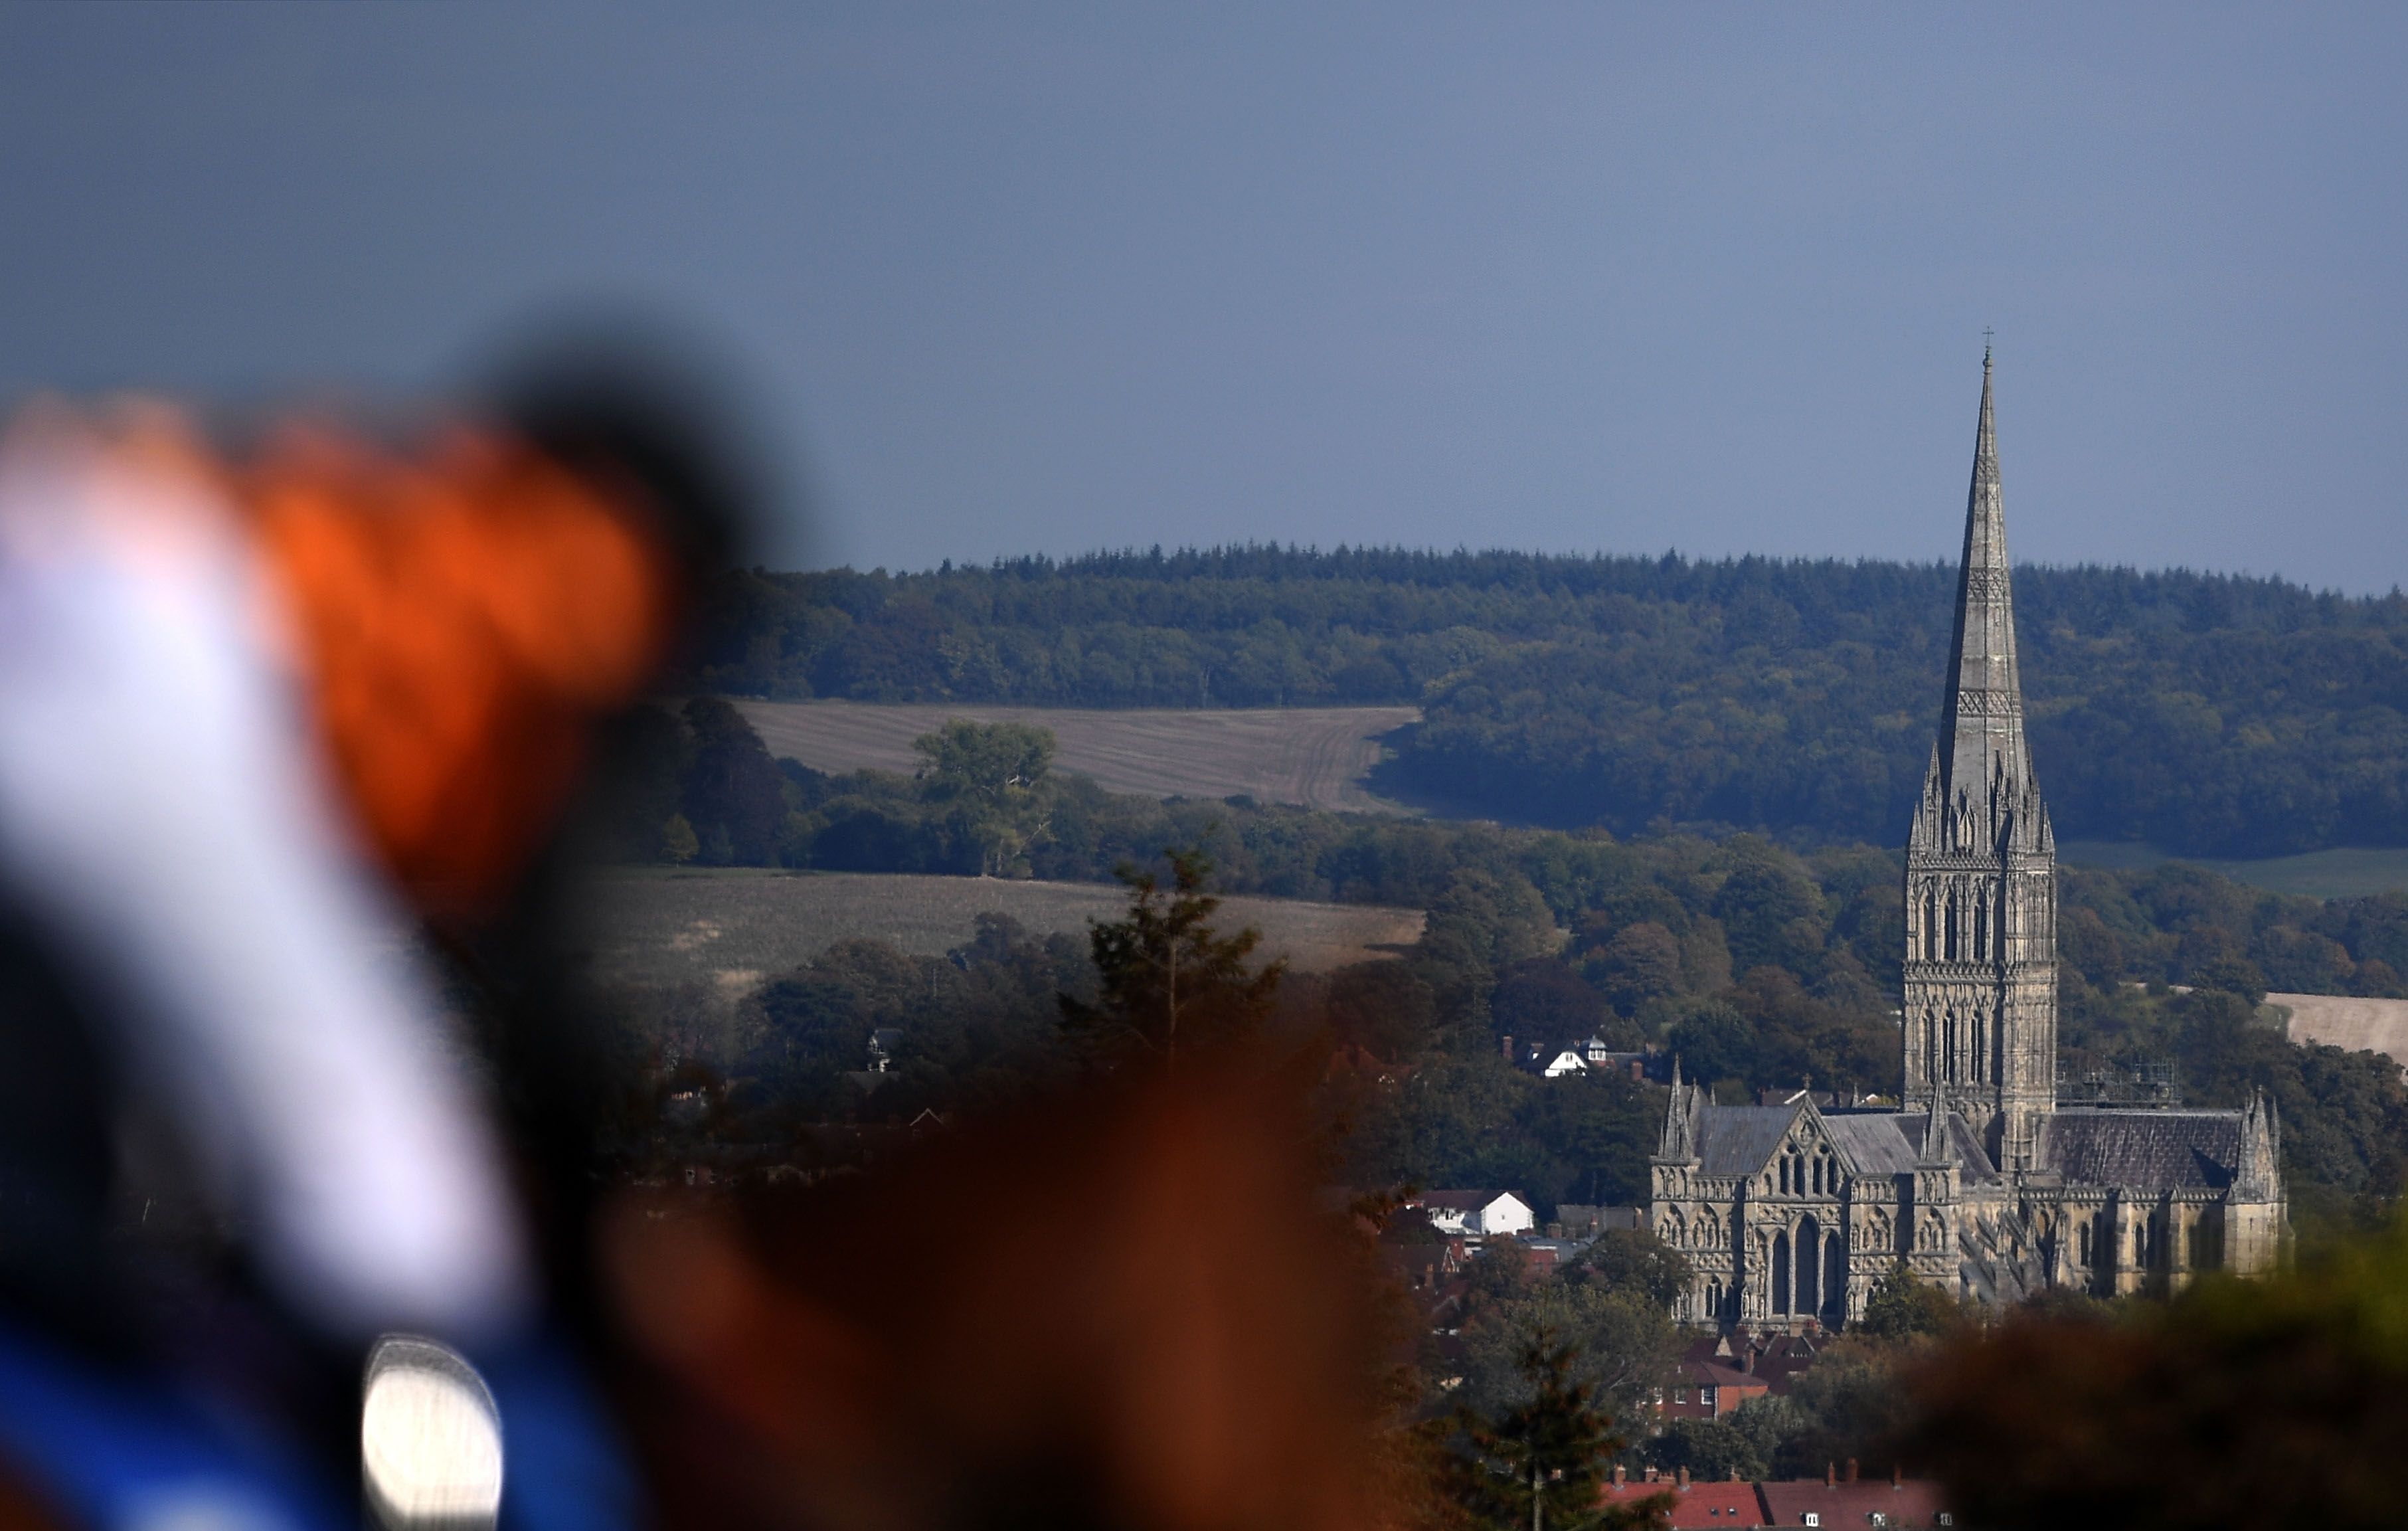 SALISBURY, ENGLAND - OCTOBER 03: Detailed view of Salisbury Cathedral as Riders make their way round the course at Salisbury Racecourse on October 3, 2018 in Salisbury, England. (Photo by Harry Trump/Getty Images)